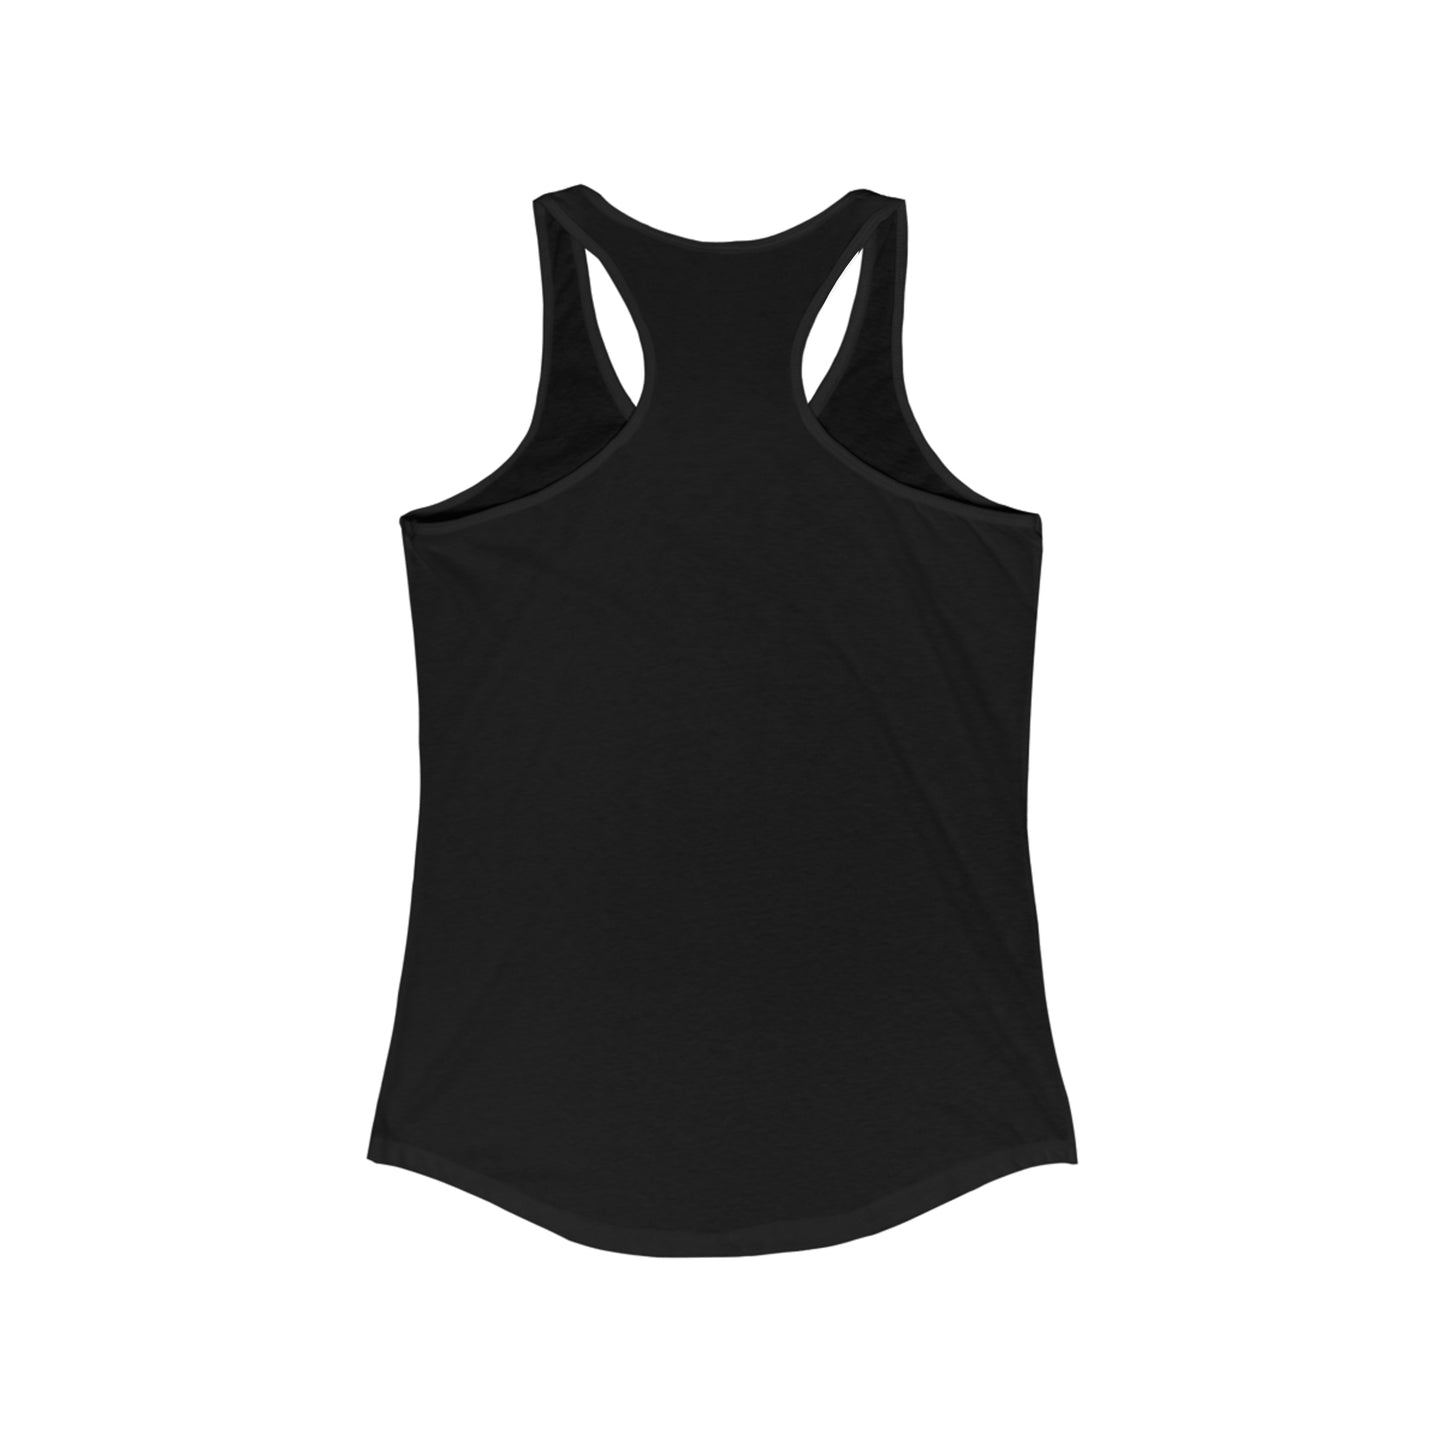 Brian Holiday Graphic Women's Racerback Tank